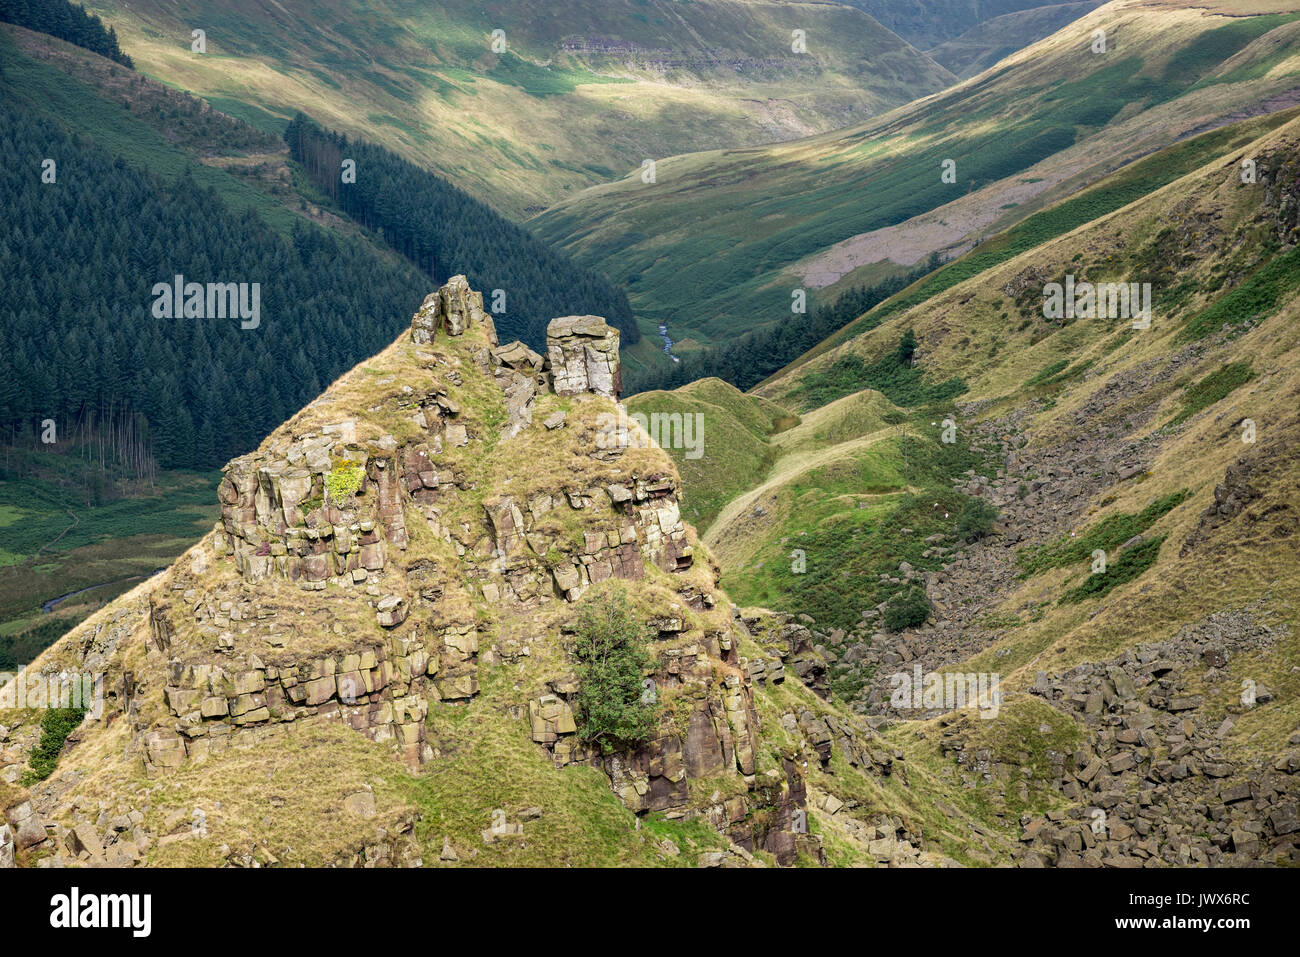 Alport Castles, A dramatic natural feature in the Alport valley, Peak District, Derbyshire, England. The pointed outcrop known as The Tower. Stock Photo